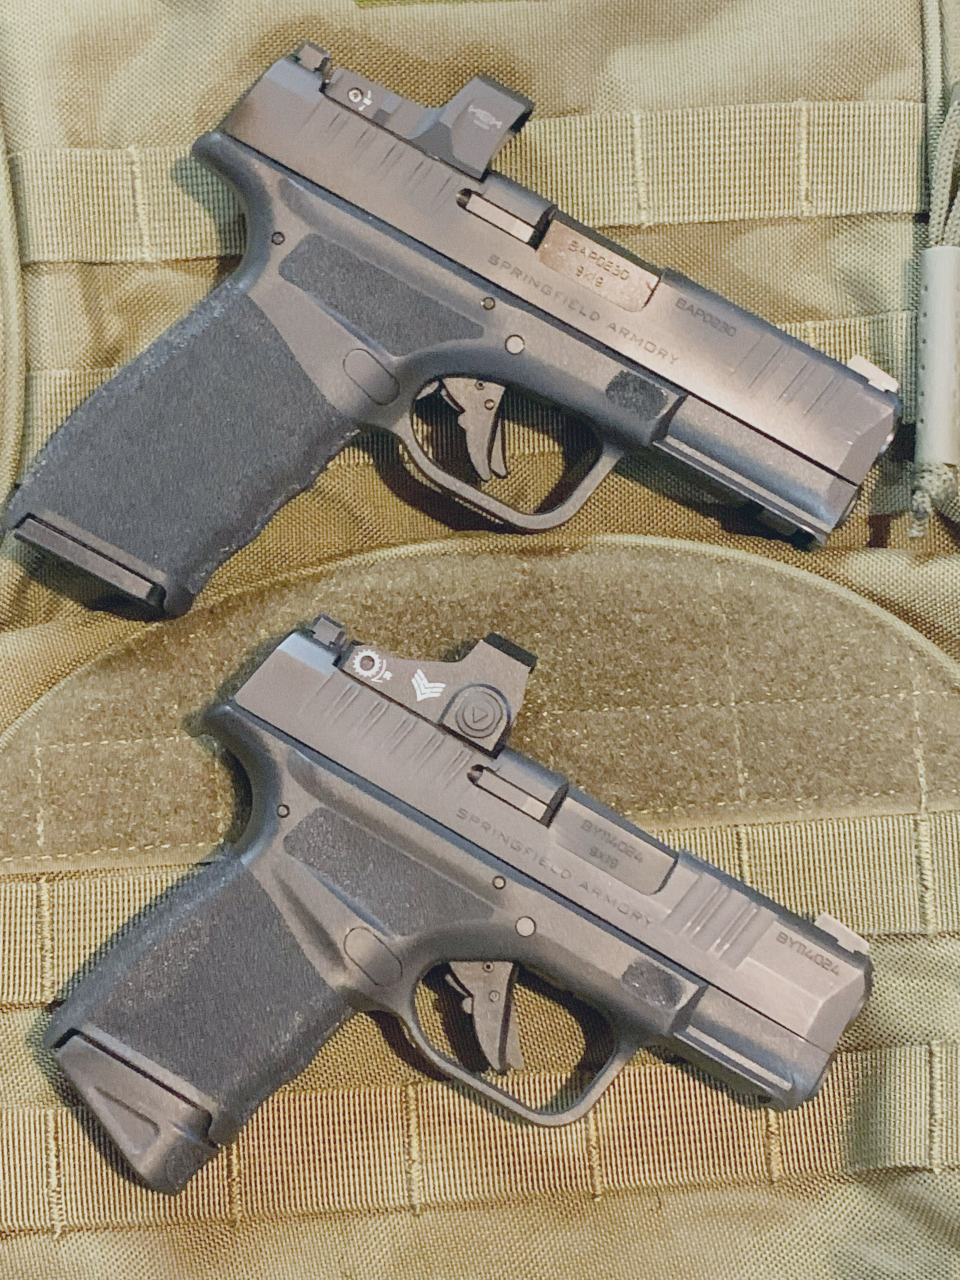 two pistols with red dot sights facing right